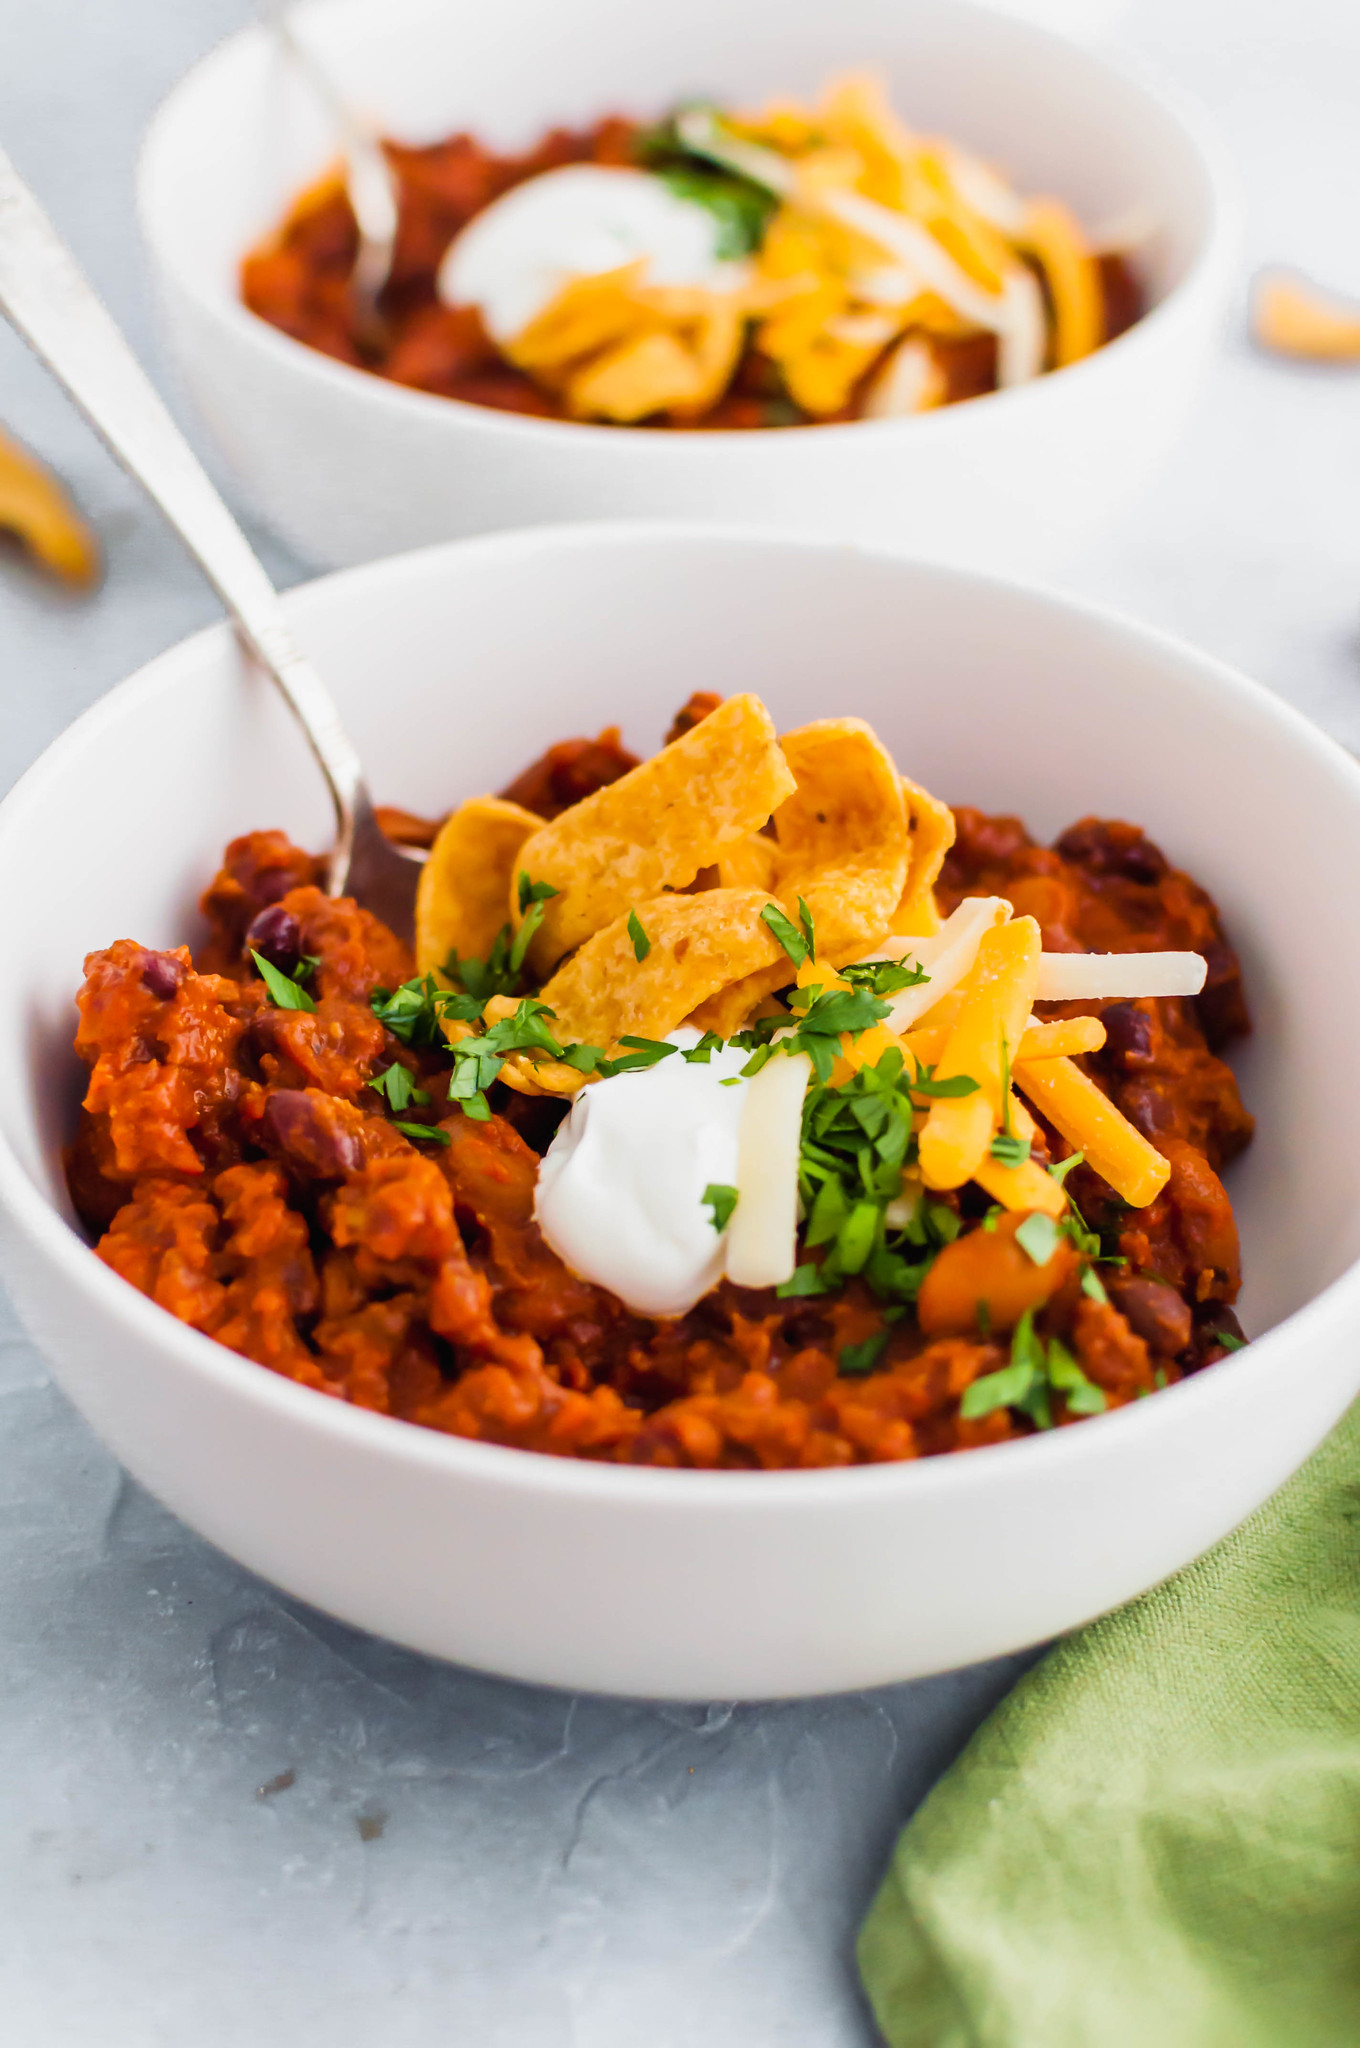 Chili season is upon us and this Chipotle Chili is my favorite. It's the perfect amount of hearty, smoky and spicy all in one bowl.